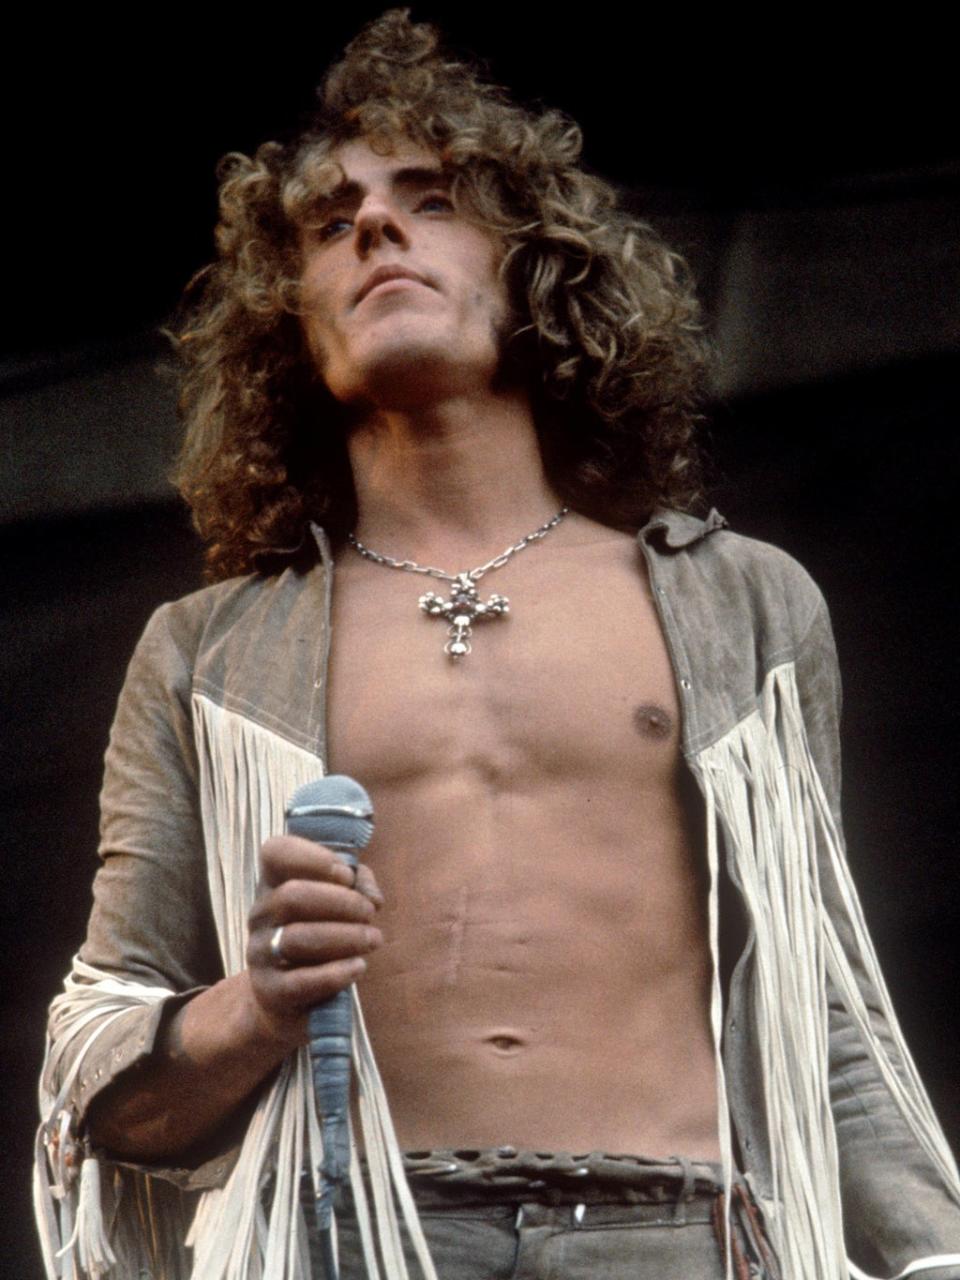 Roger Daltrey at the Isle of Wight Festival, 1969 (Shutterstock)